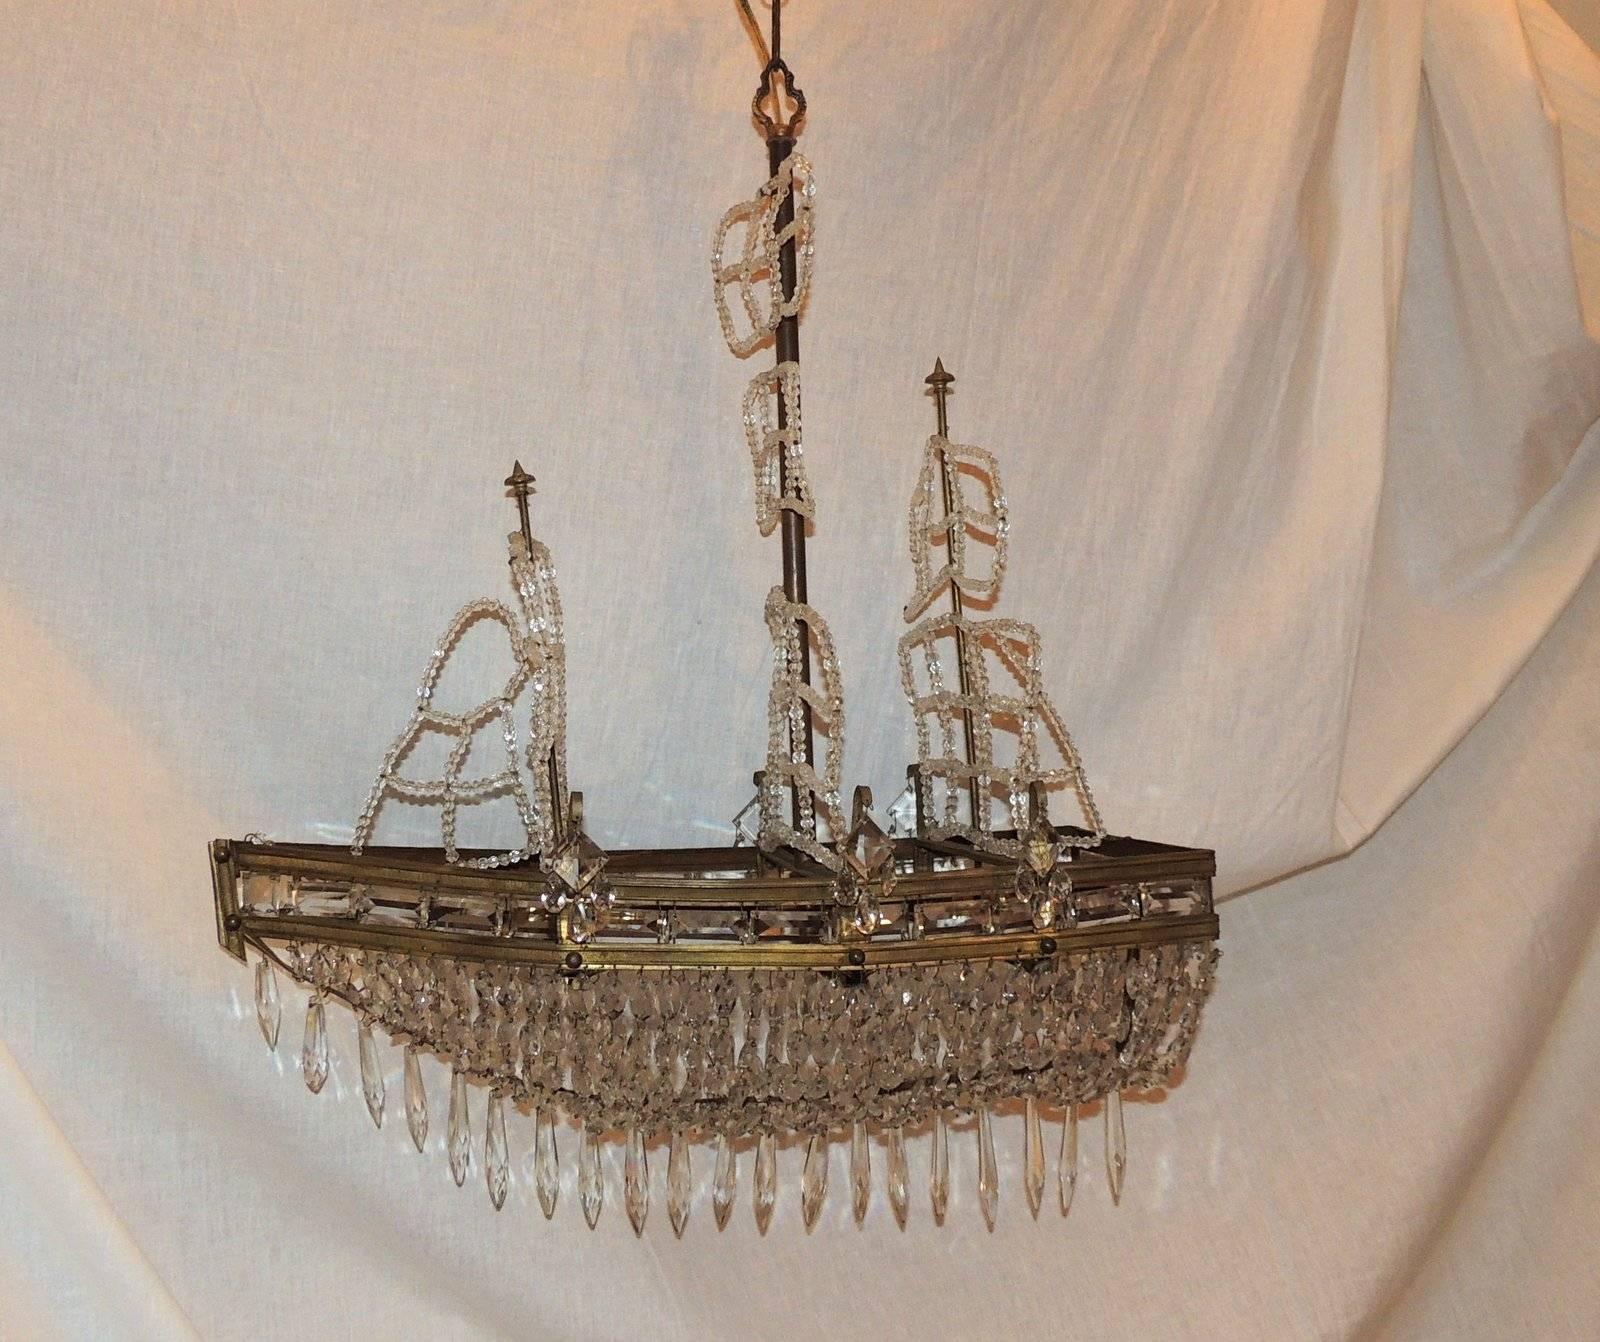 A wonderful sailboat chandelier decorated with etched gilt bronze detail, crystal beaded sails, crystal hull and five interior lights.

Measures: 30" H x 23" W x 11" D.